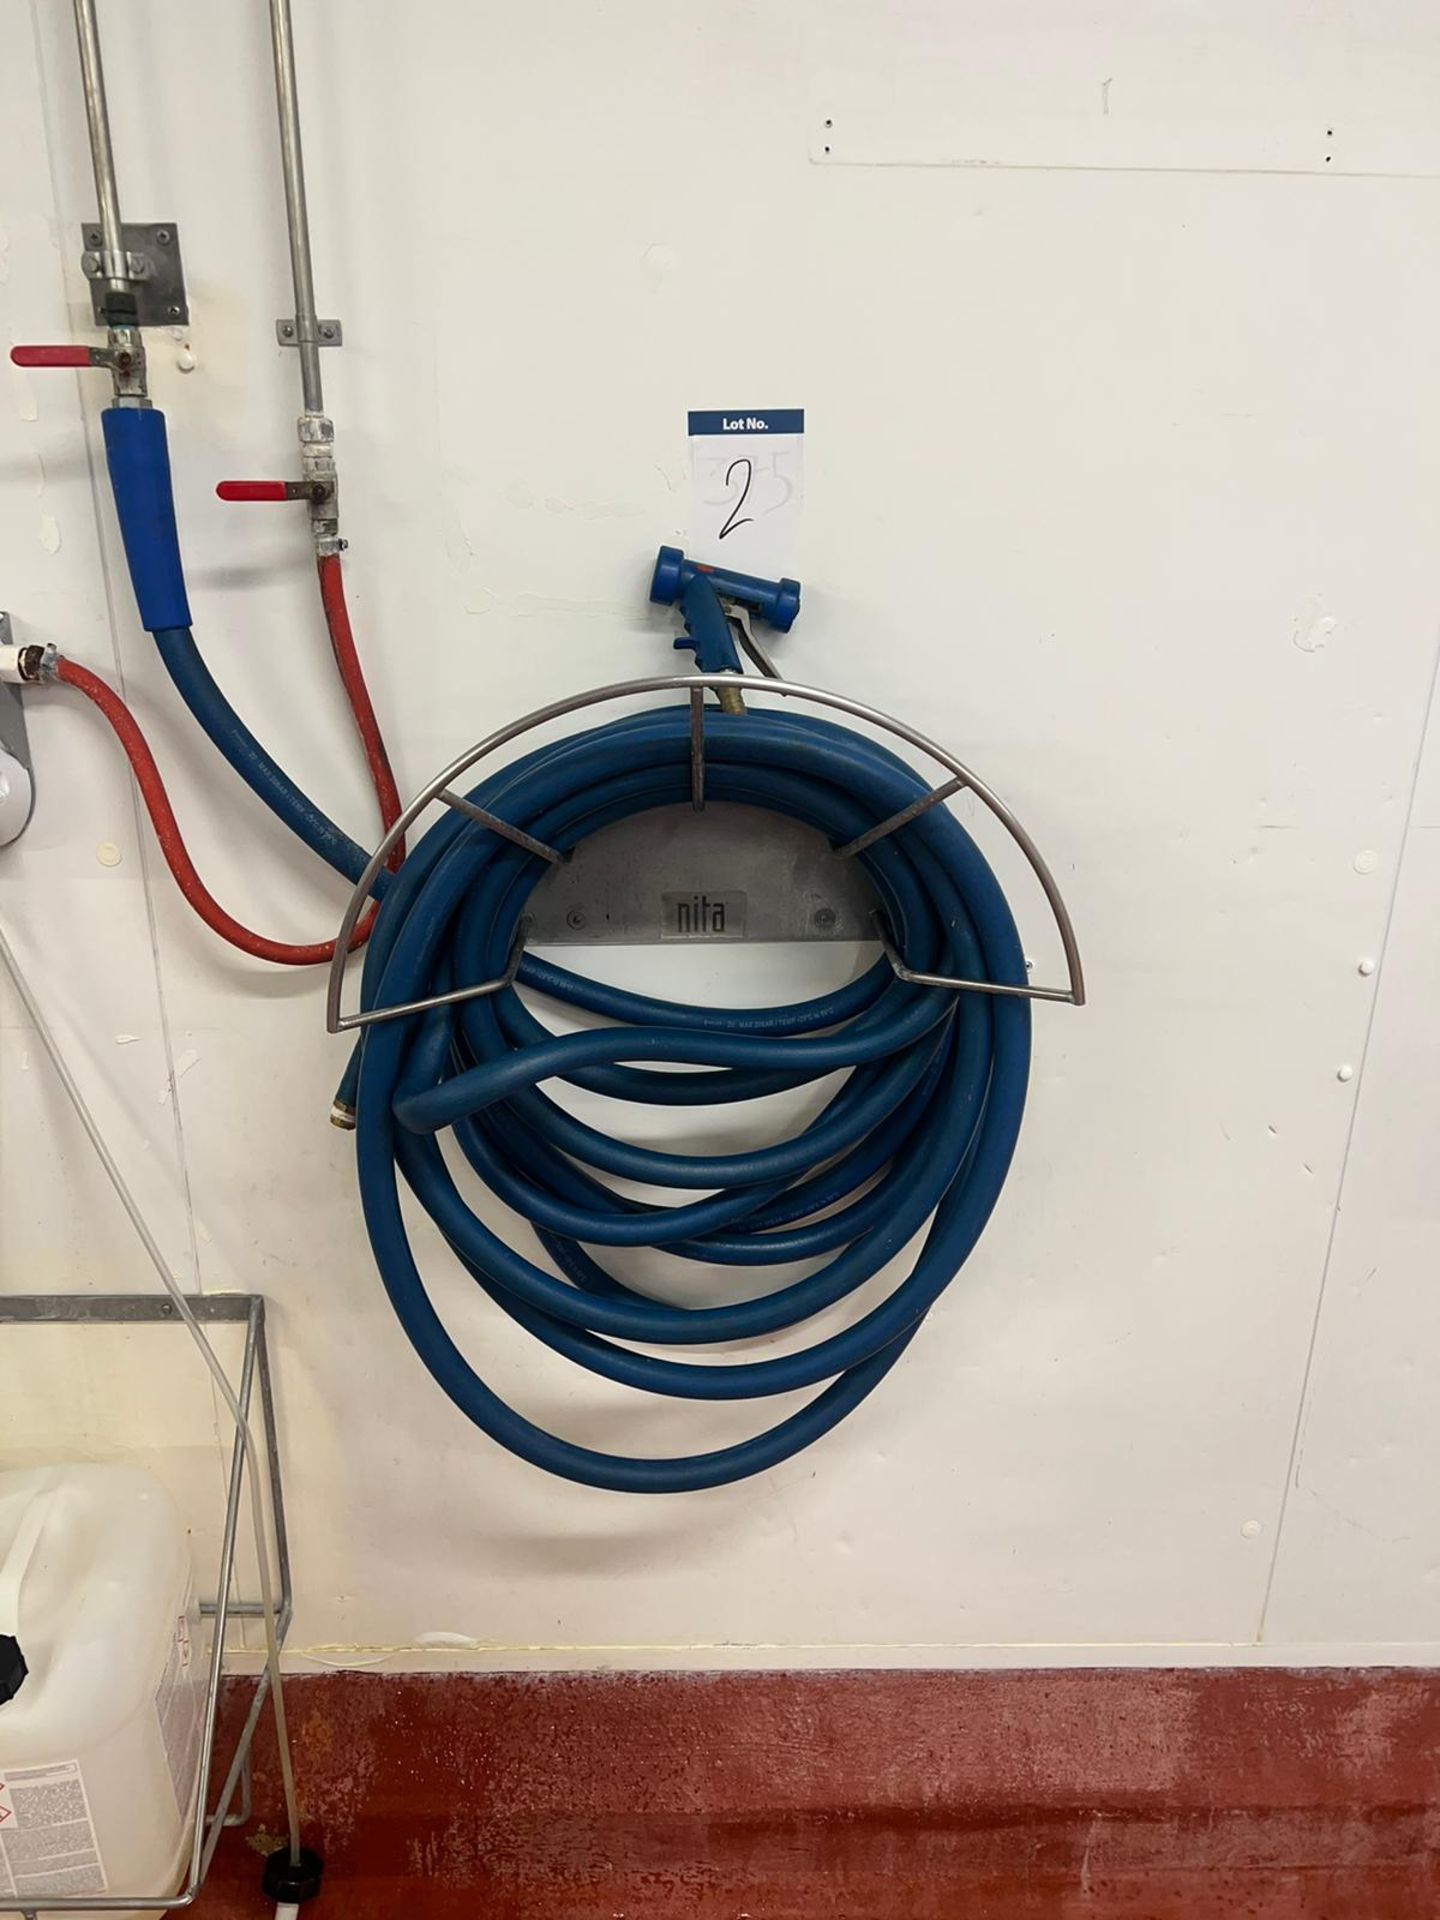 STAINLESS STEEL WALL MOUNTED HOSE HOLDER AND HOSE - Image 2 of 2